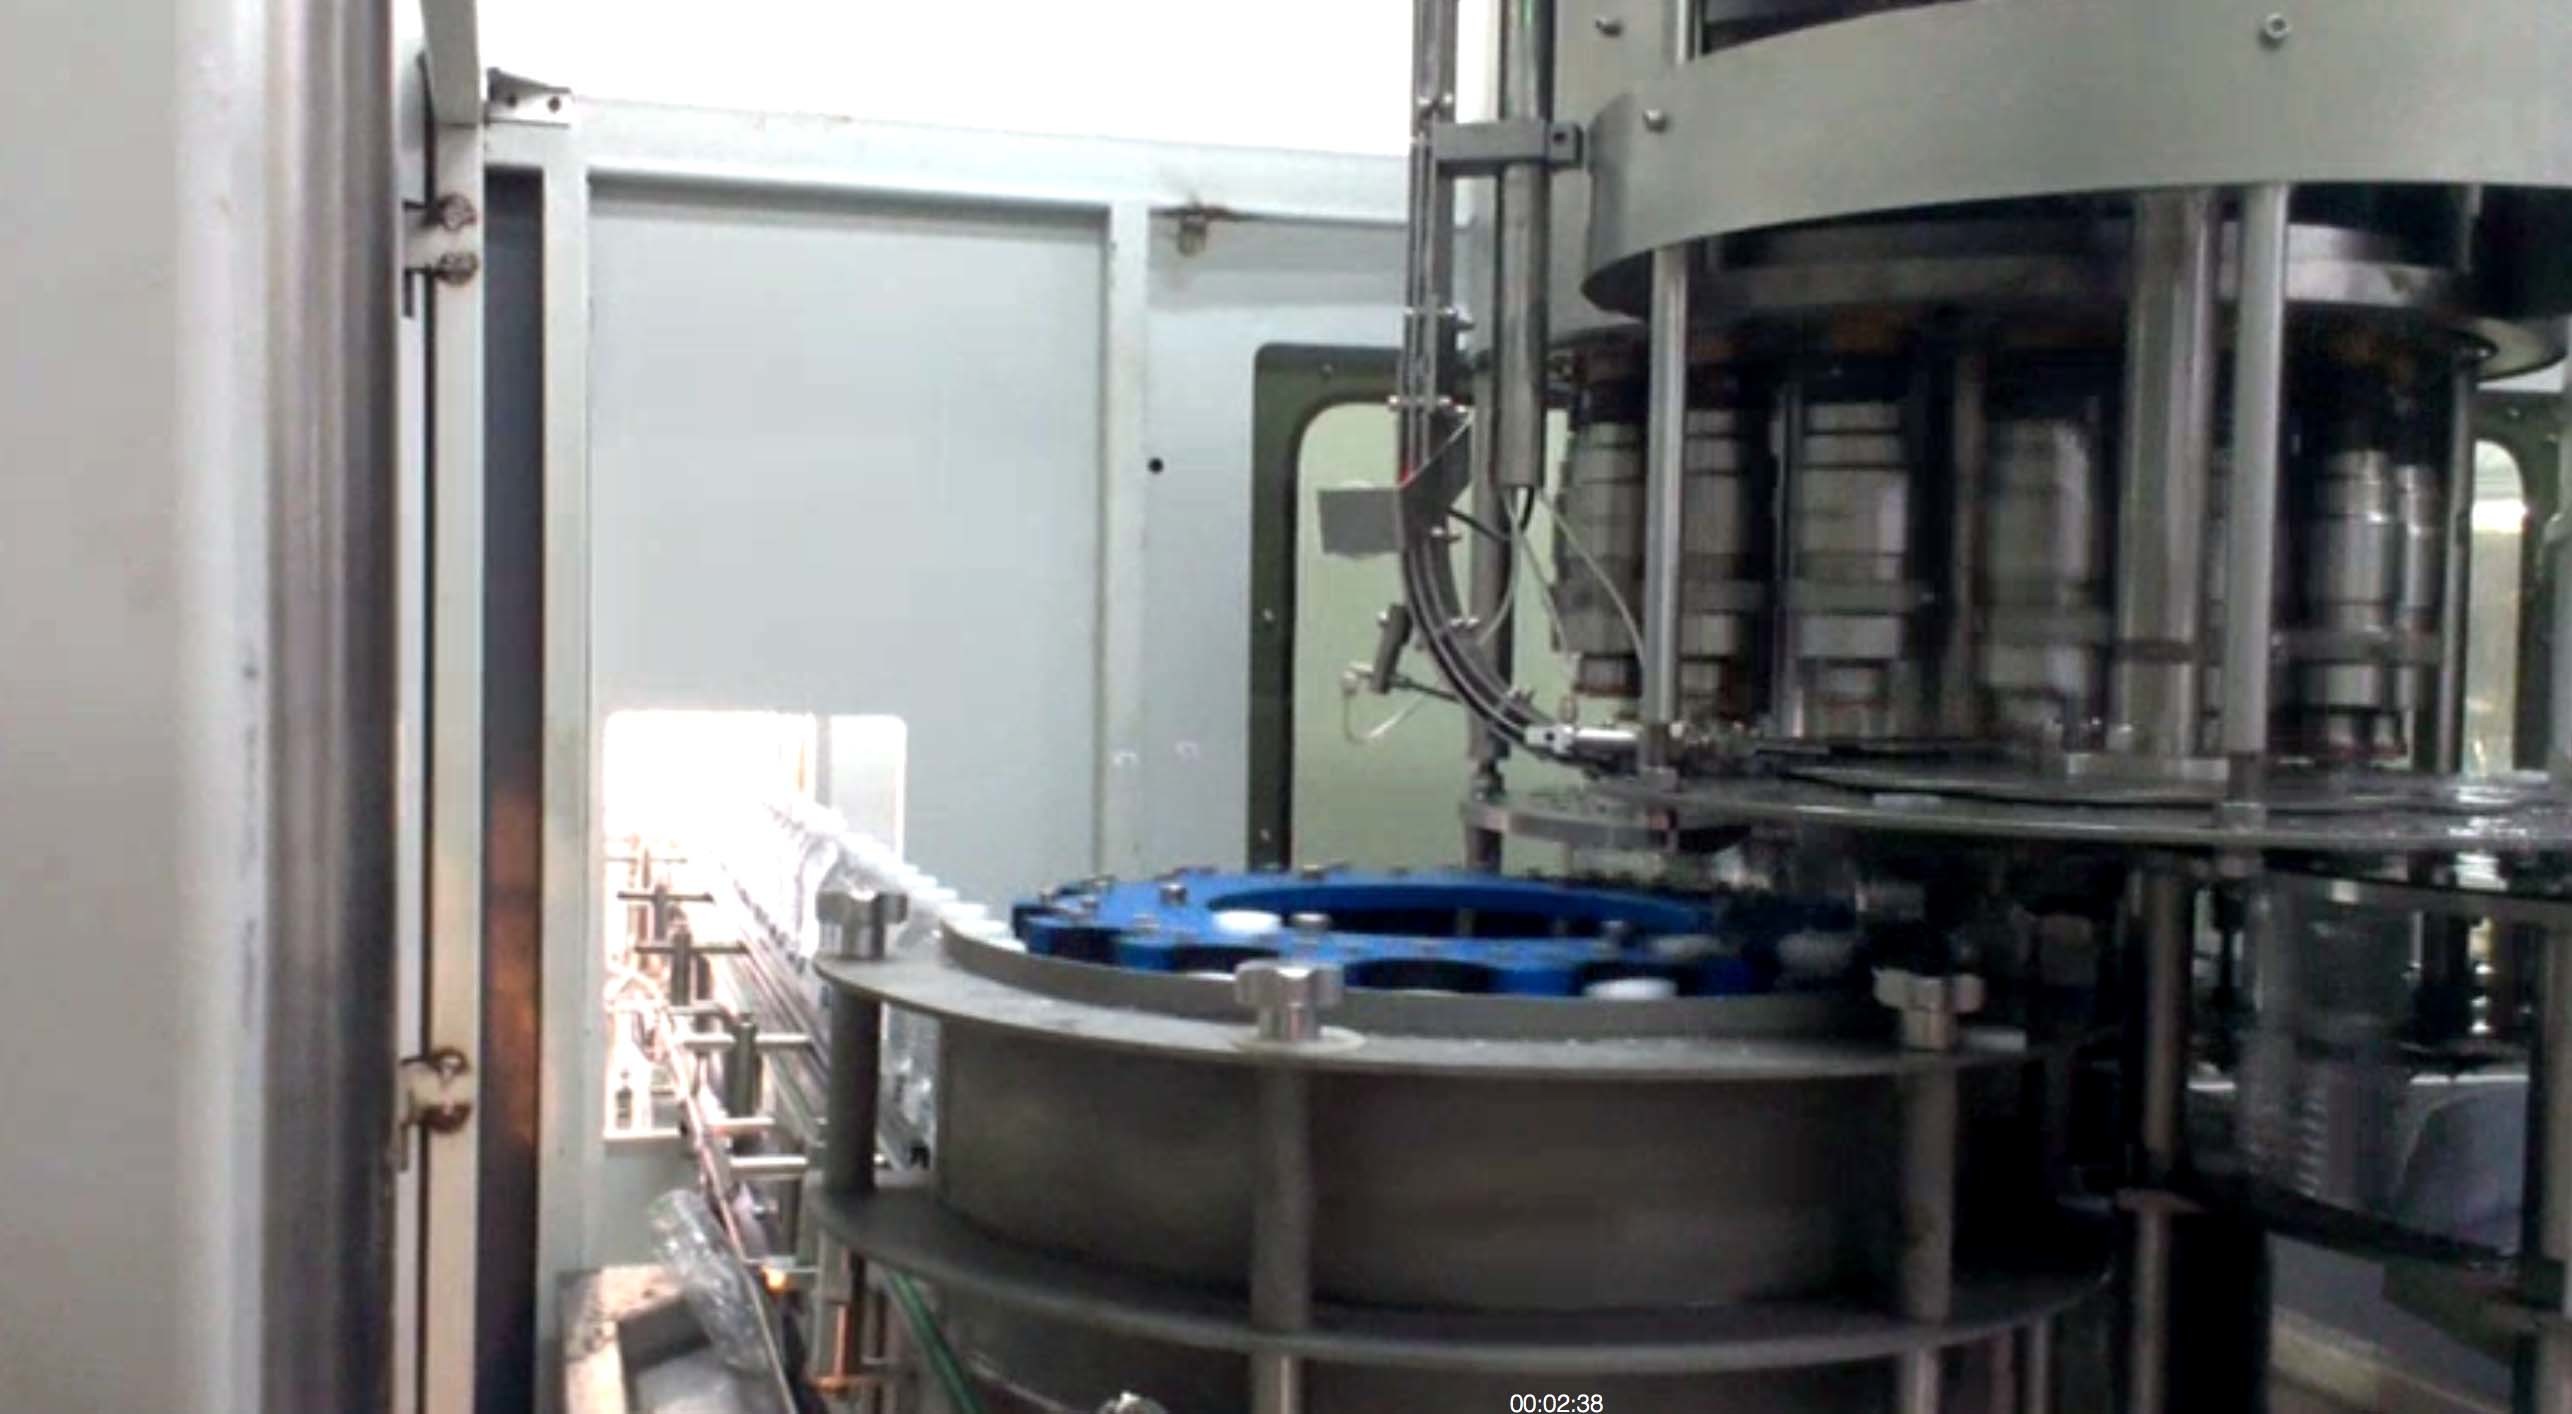 water filling machine - accupacking